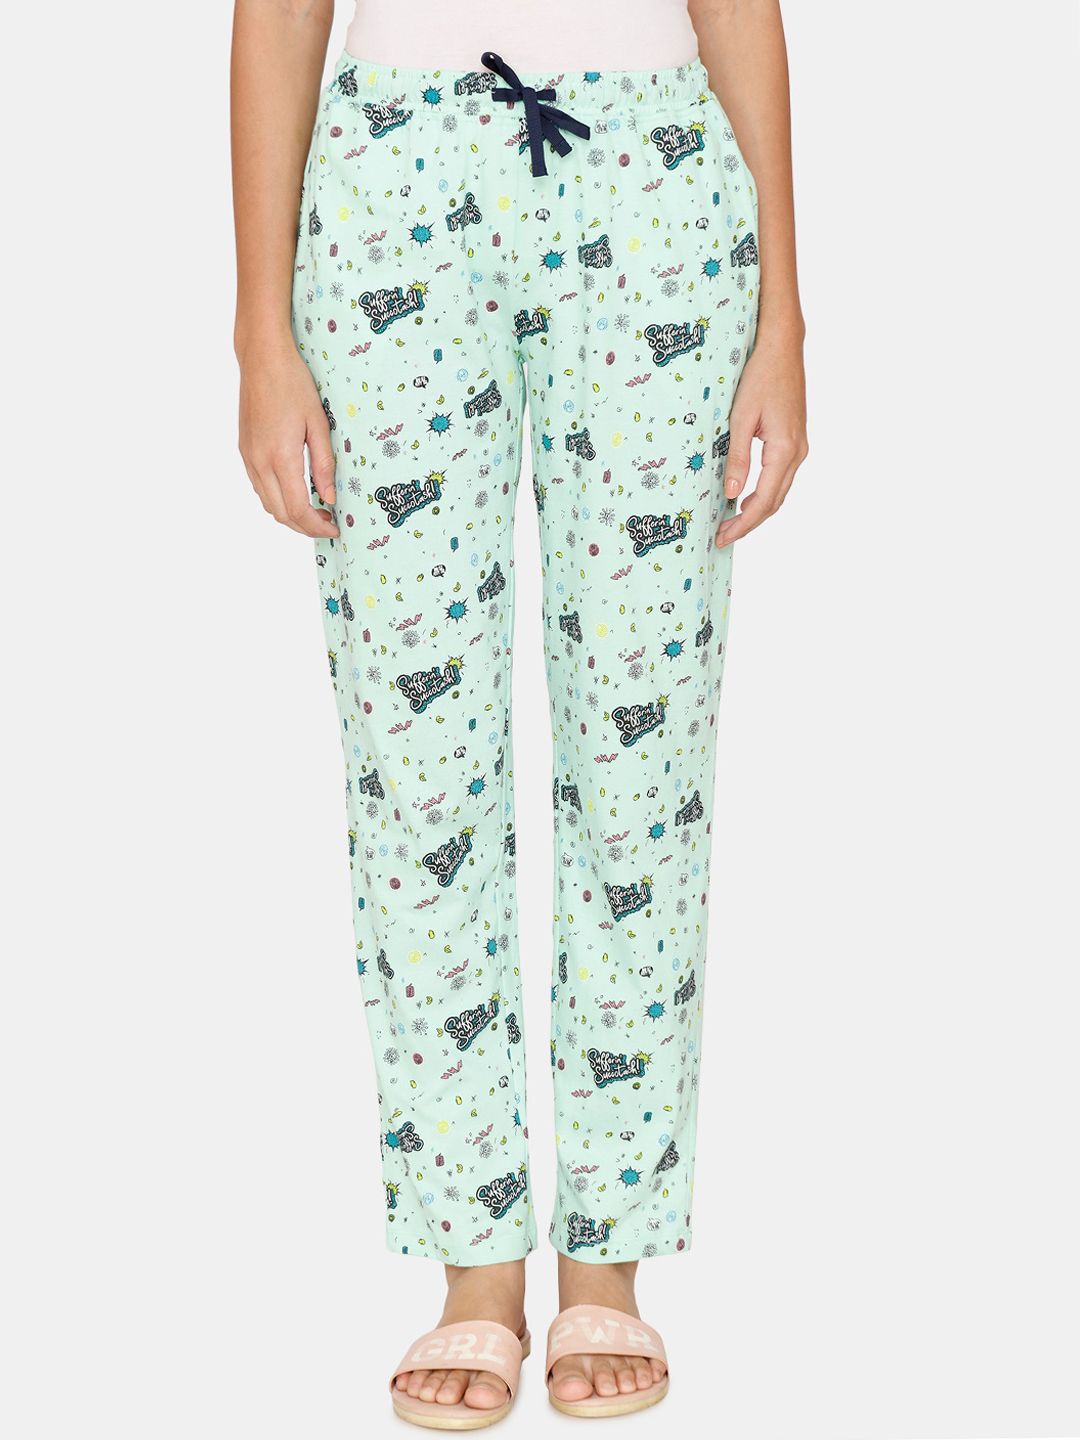 Zivame Green Printed Cotton Lounge Pants Price in India